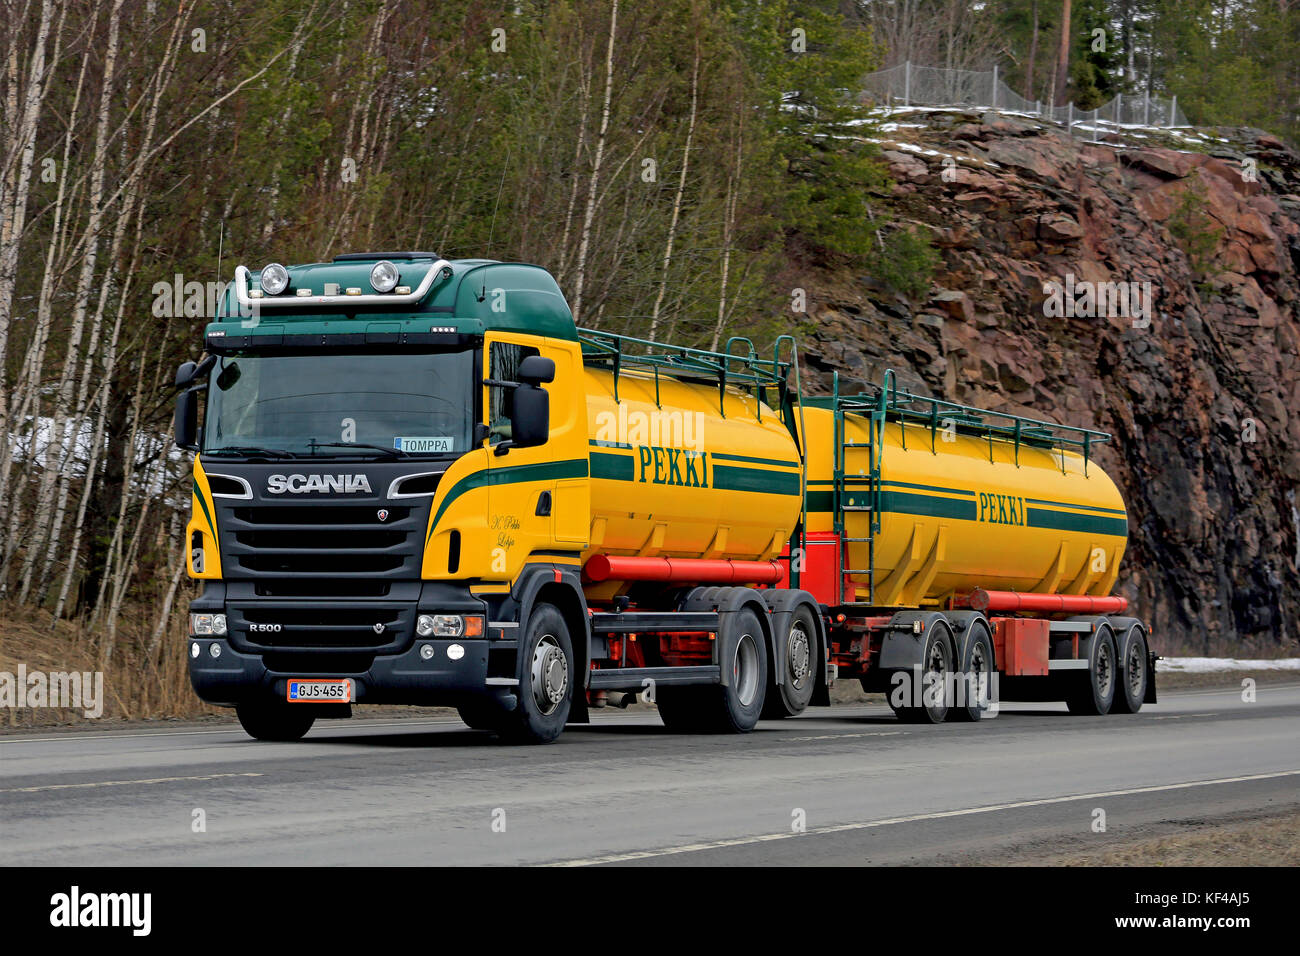 KARJAA, FINLAND - MARCH 5, 2016: Scania R500 tank truck for bulk transport on the road. Scania celebrates 125 years in 2016. Stock Photo